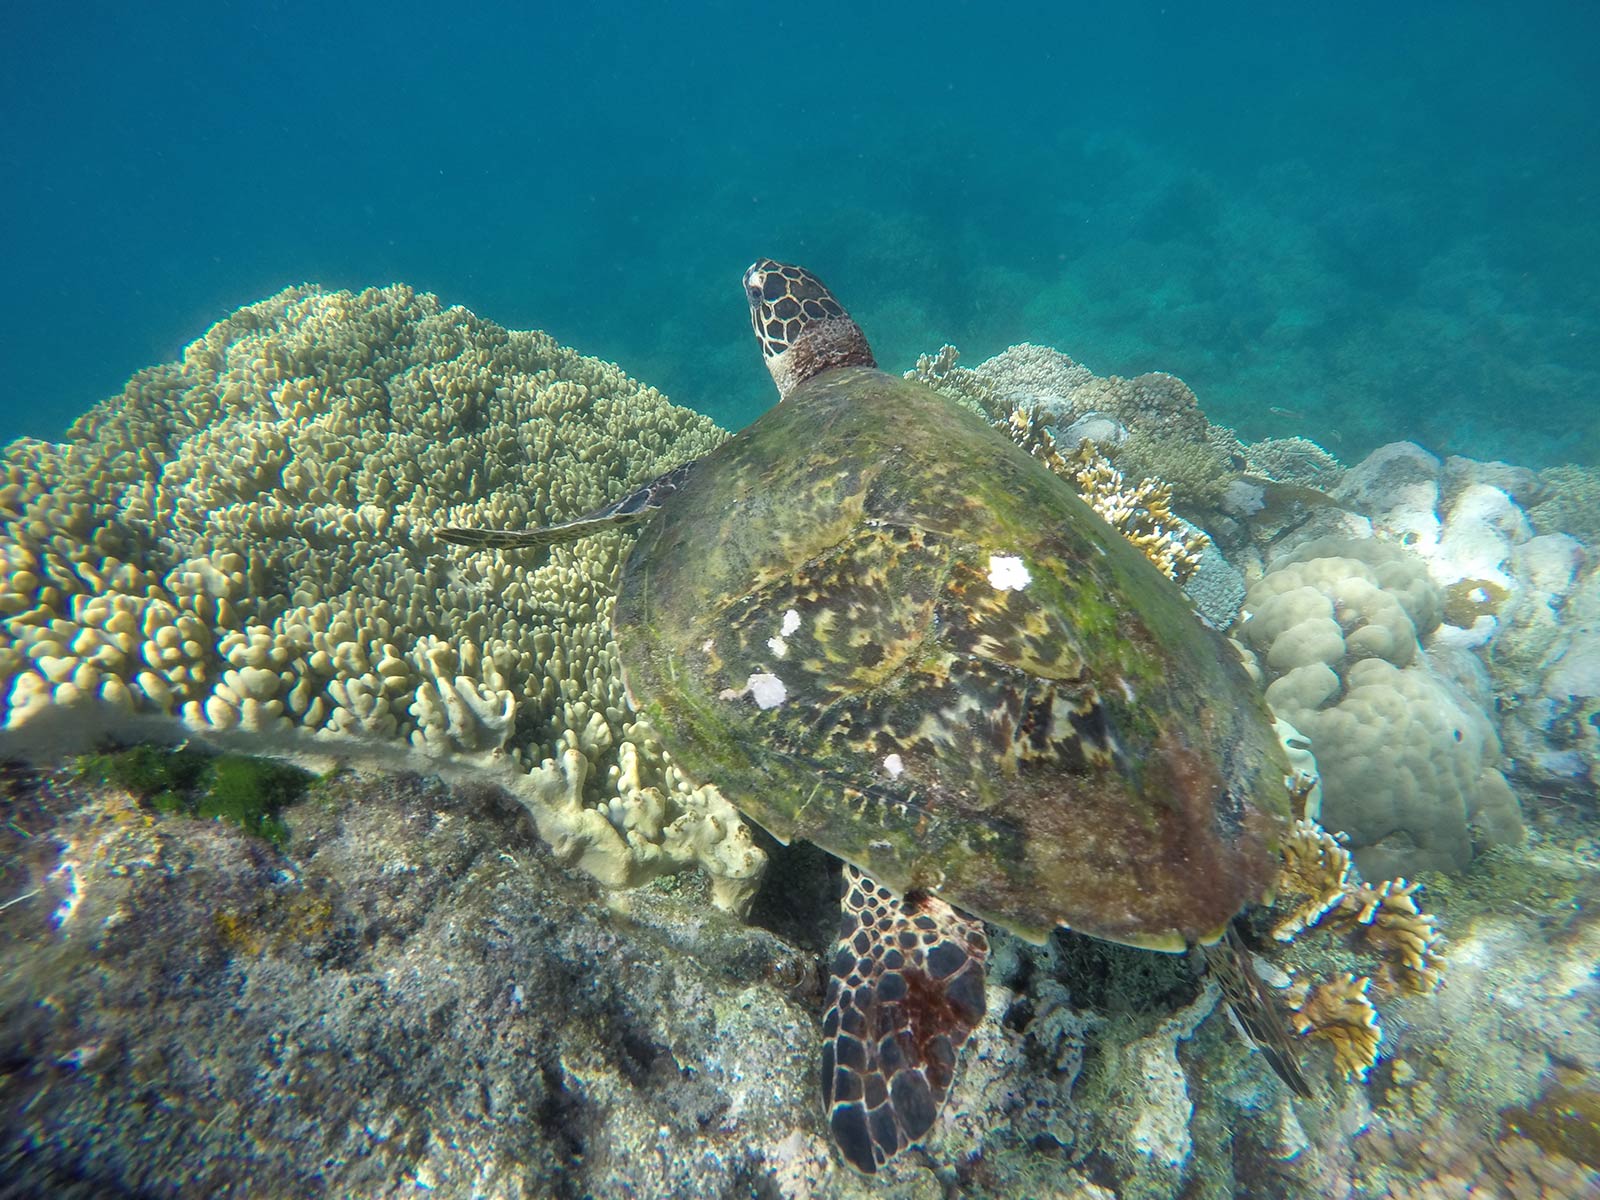 Turtle underwater among corals in Apo Island, Philippines. Turtles at Apo Island & Dumaguete